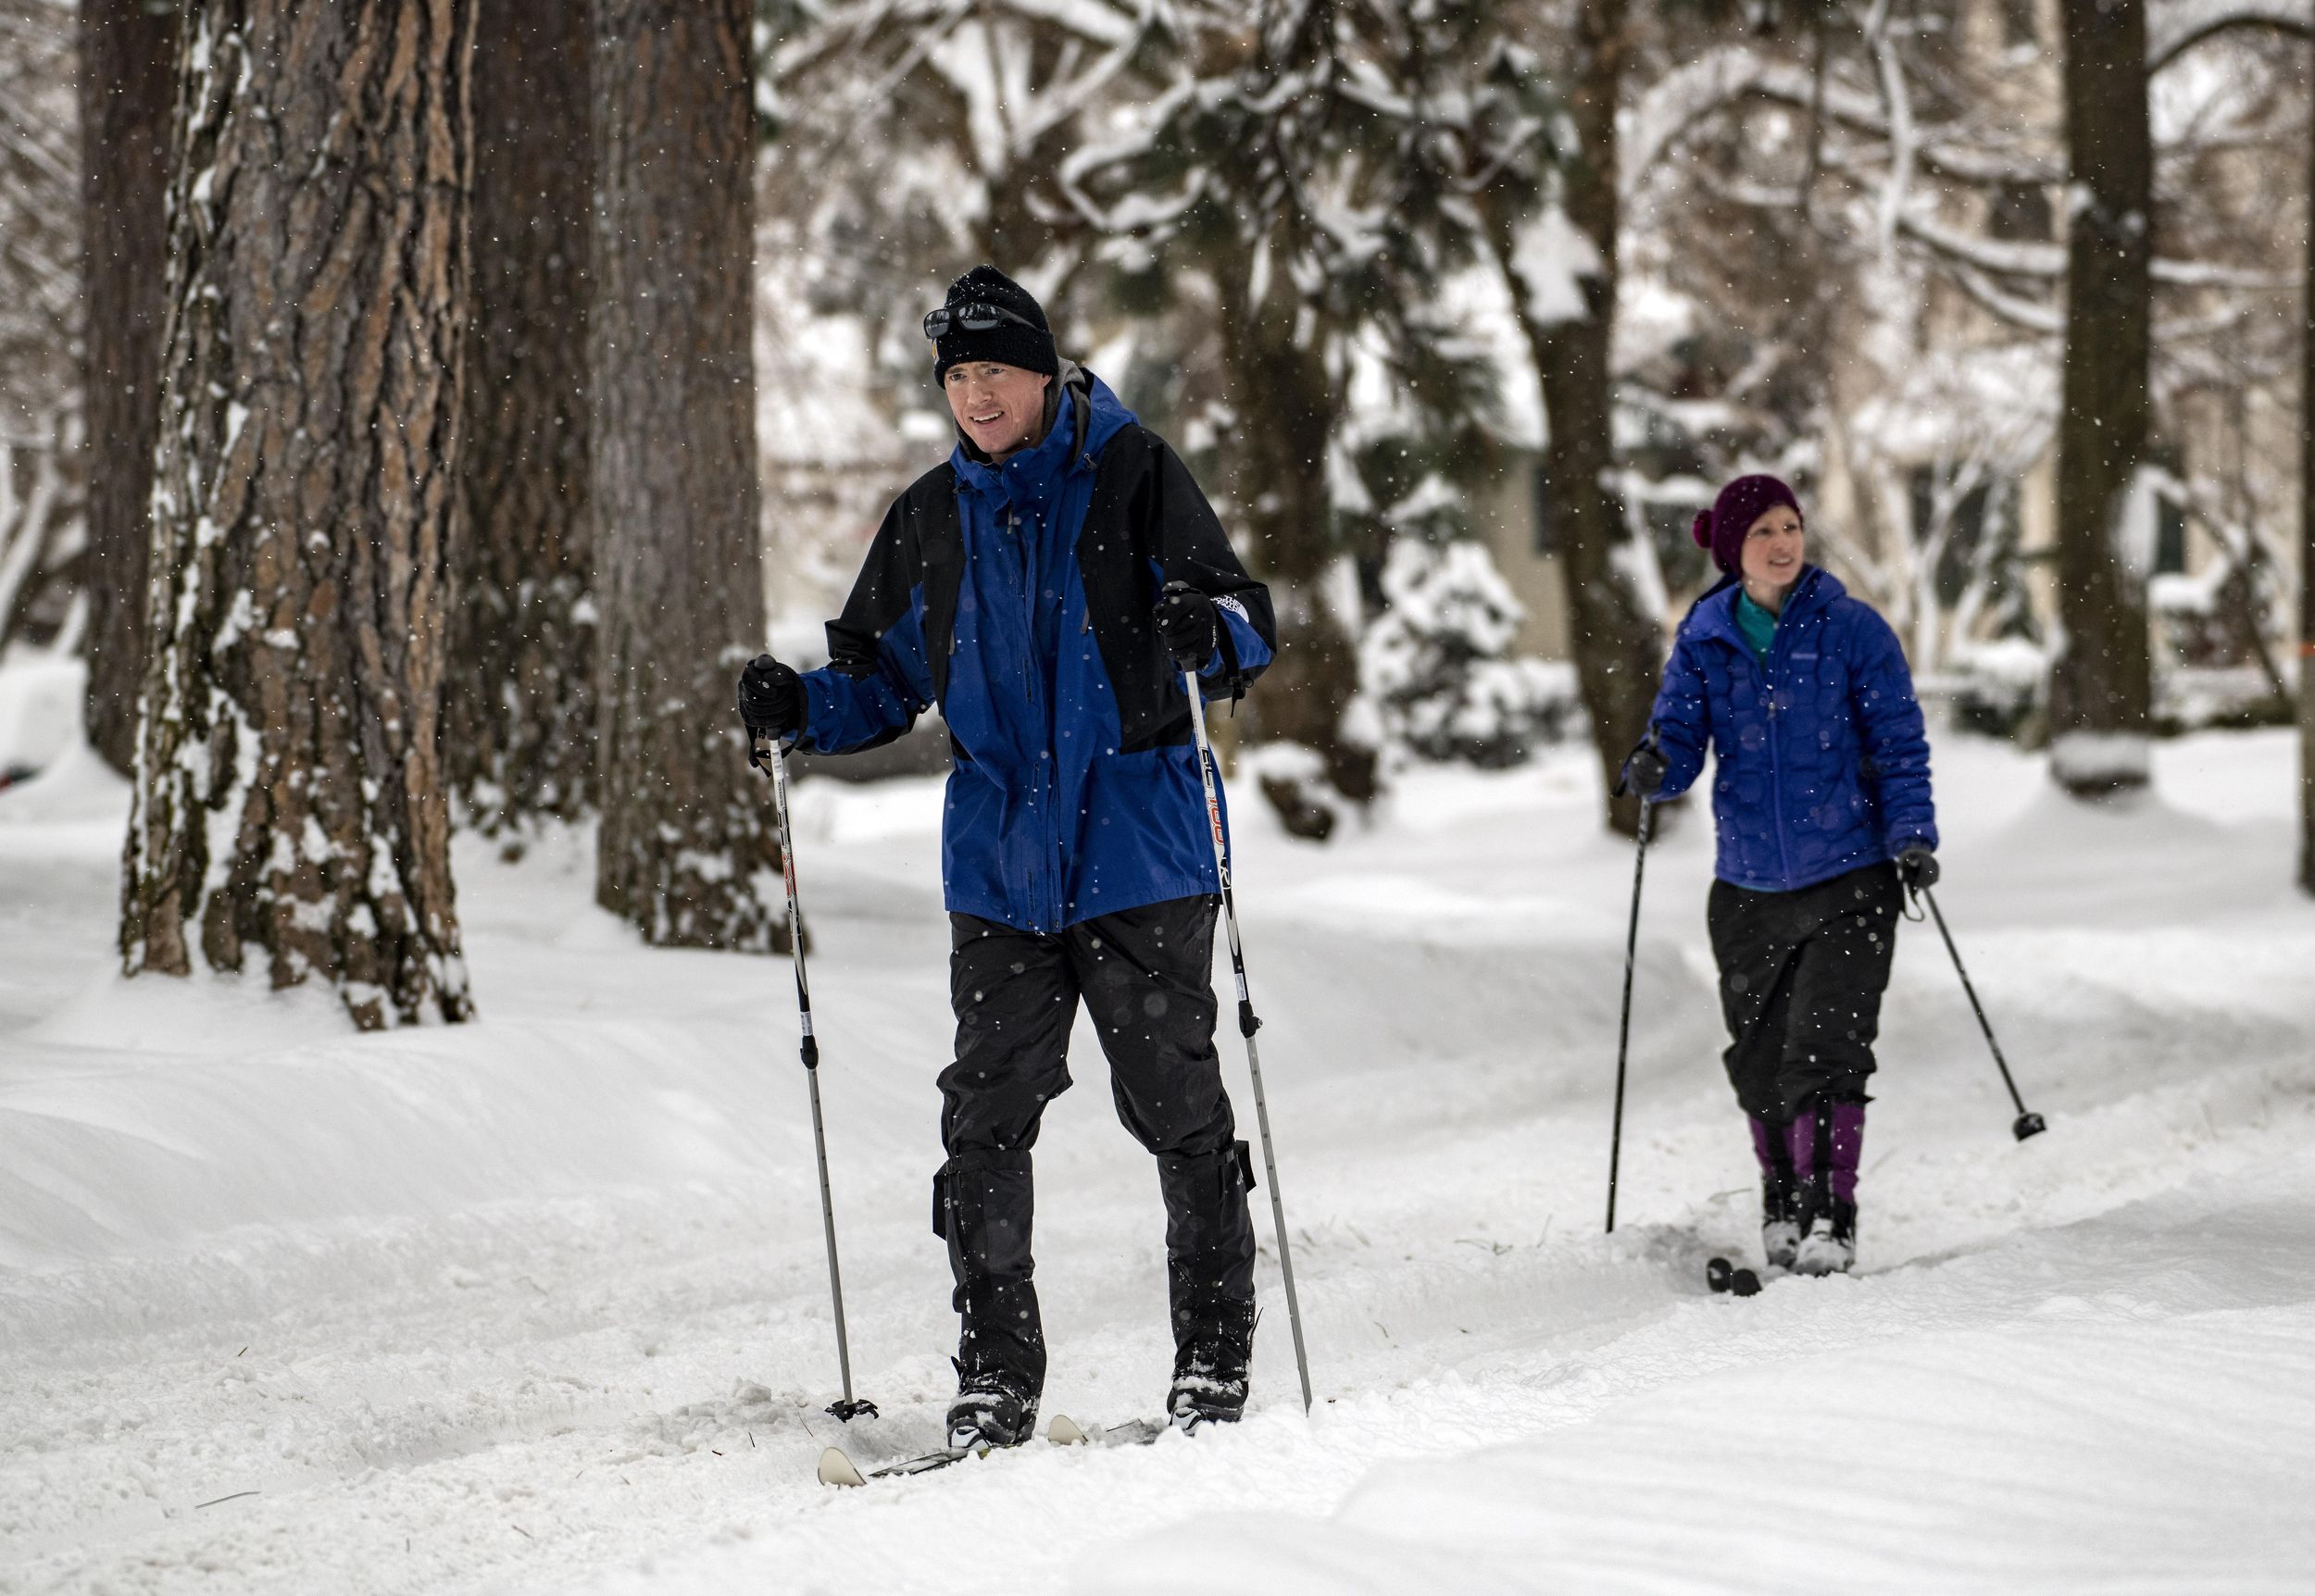 No-fee cross-country ski trails are groomed and open in Spokane | The ...